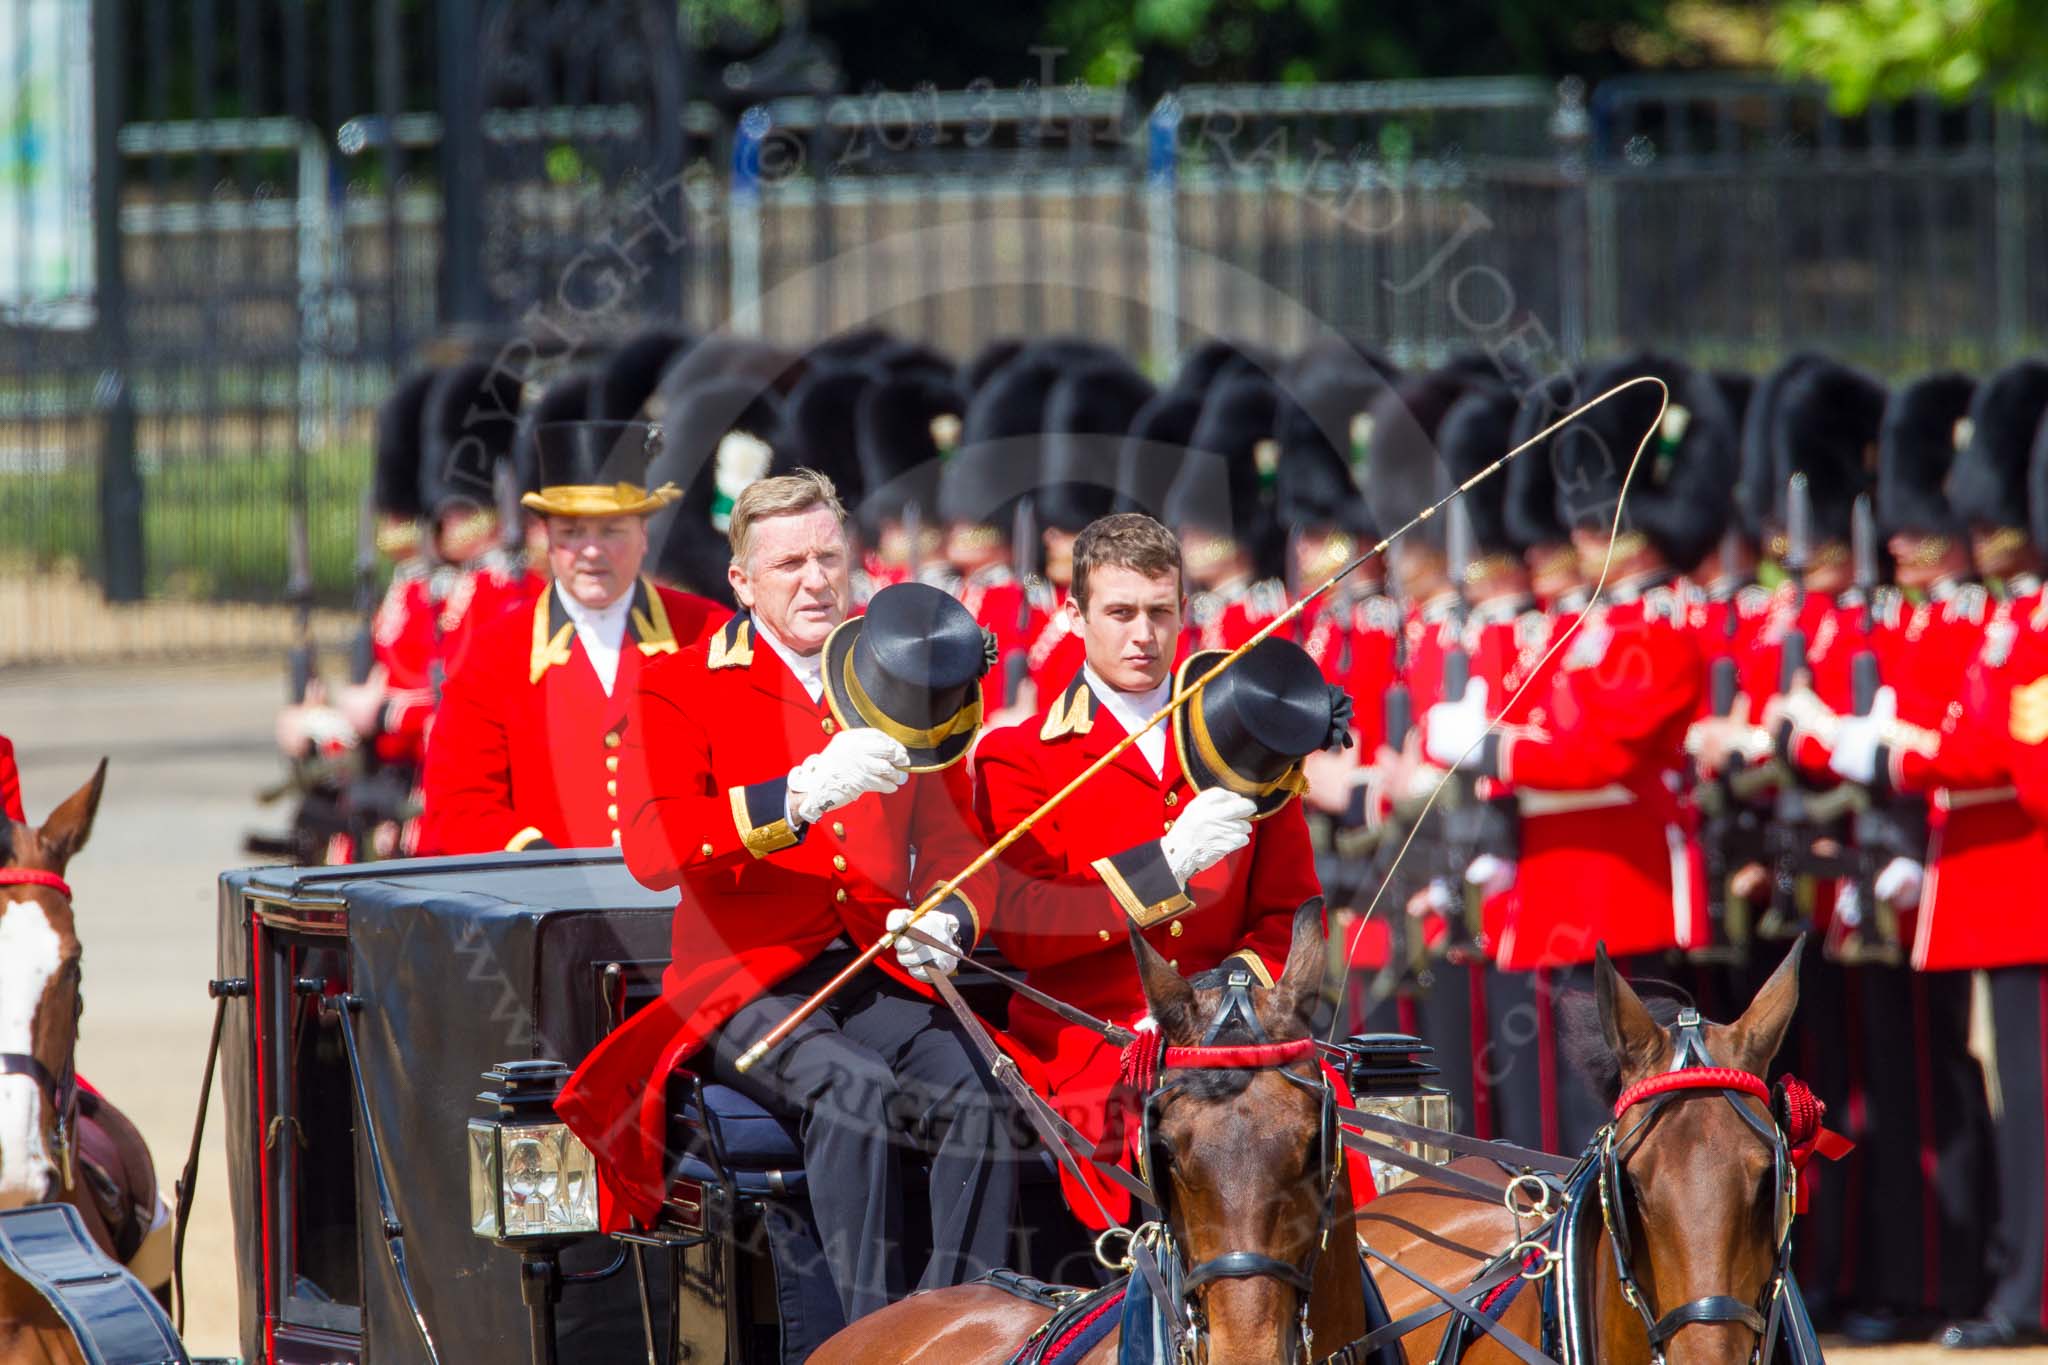 The Colonel's Review 2013: The coachmen salute when passing the Colour..
Horse Guards Parade, Westminster,
London SW1,

United Kingdom,
on 08 June 2013 at 10:51, image #228